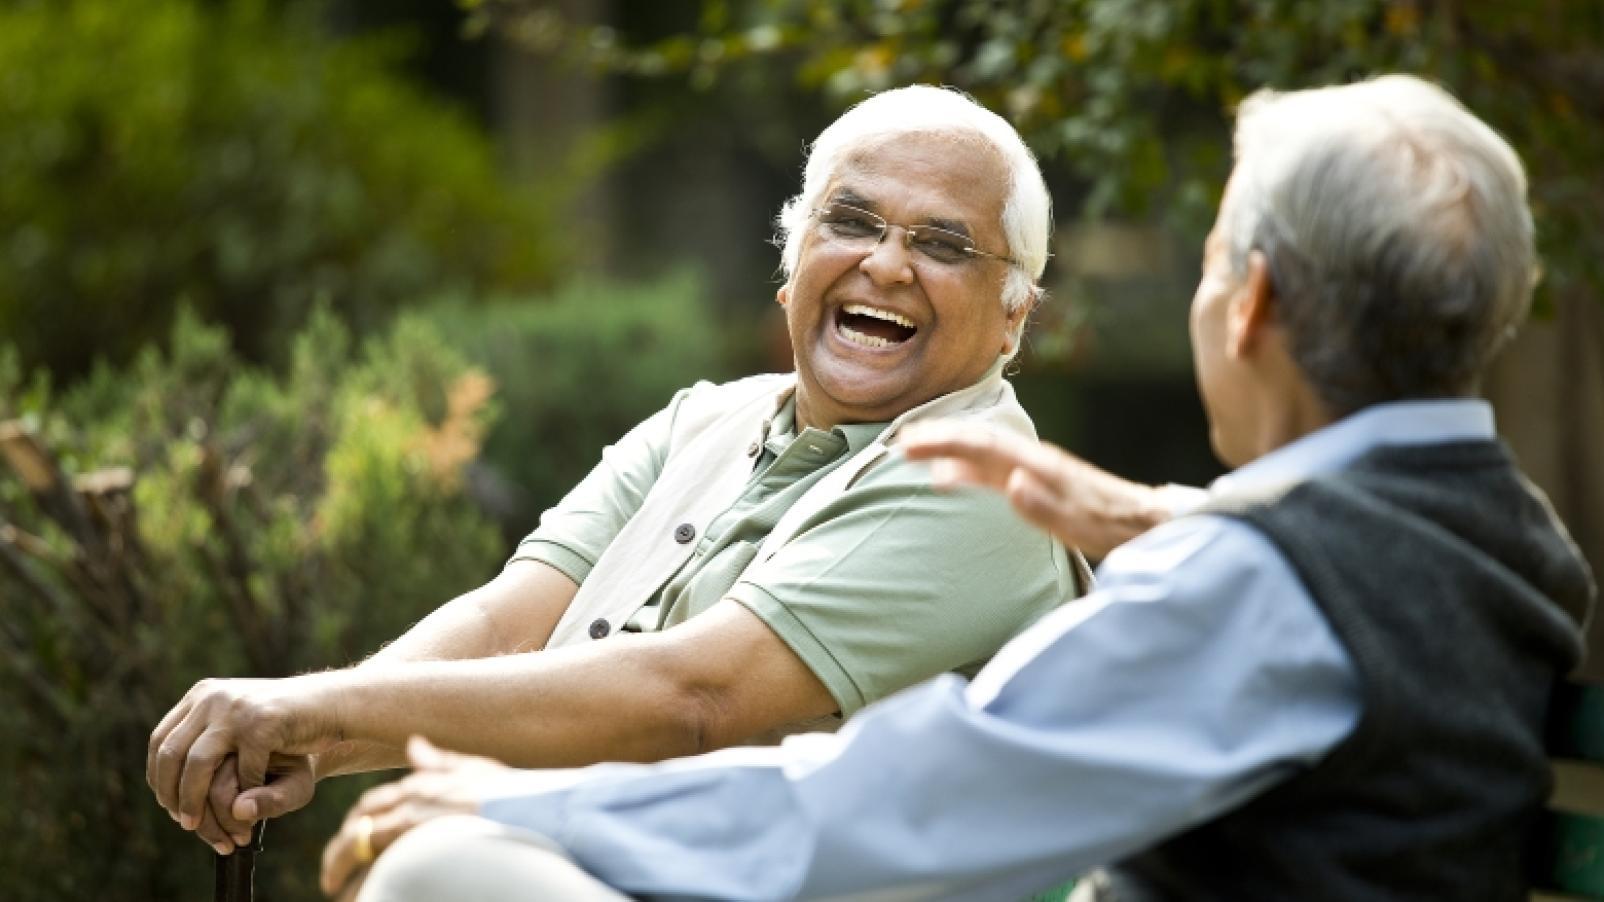 Two elderly friends share a laugh in the park